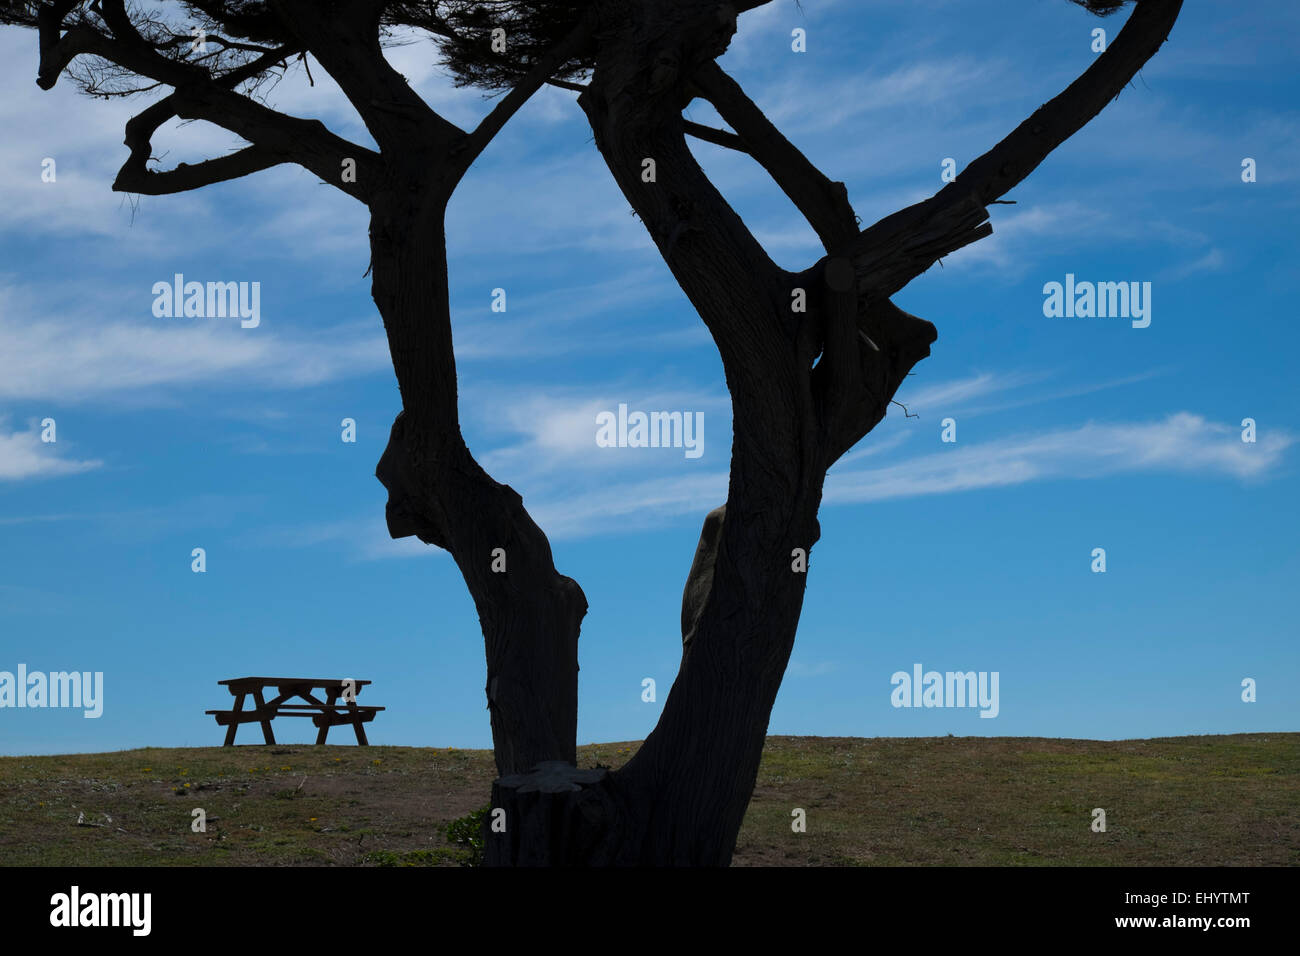 Silhouette of bench and tree, Swansea Promenade, Wales, UK Stock Photo